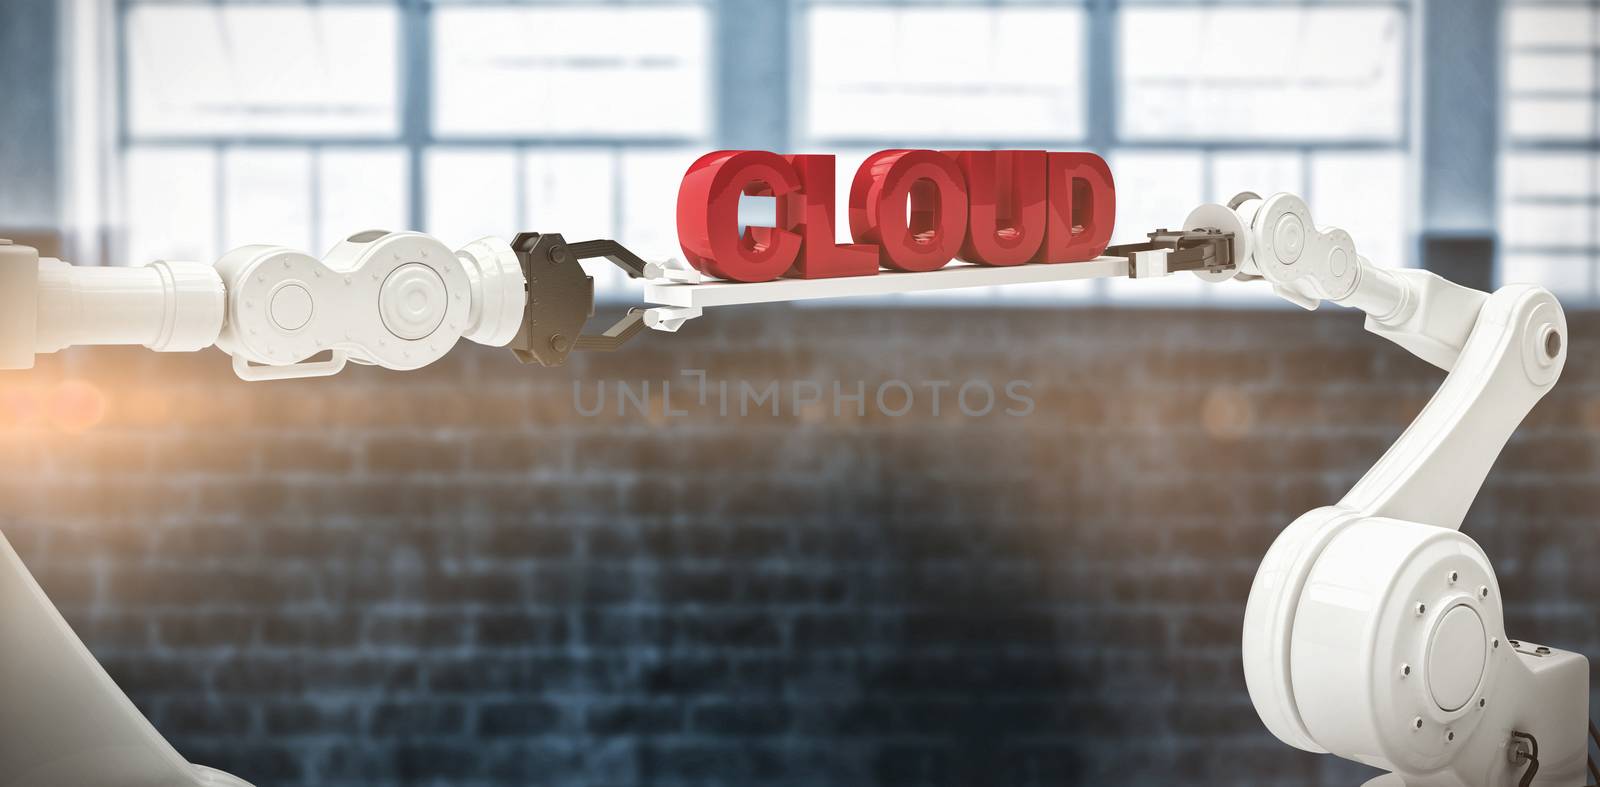 Metallic robotic hands holding cloud text on white background against digitally generated image of windows on brick wall